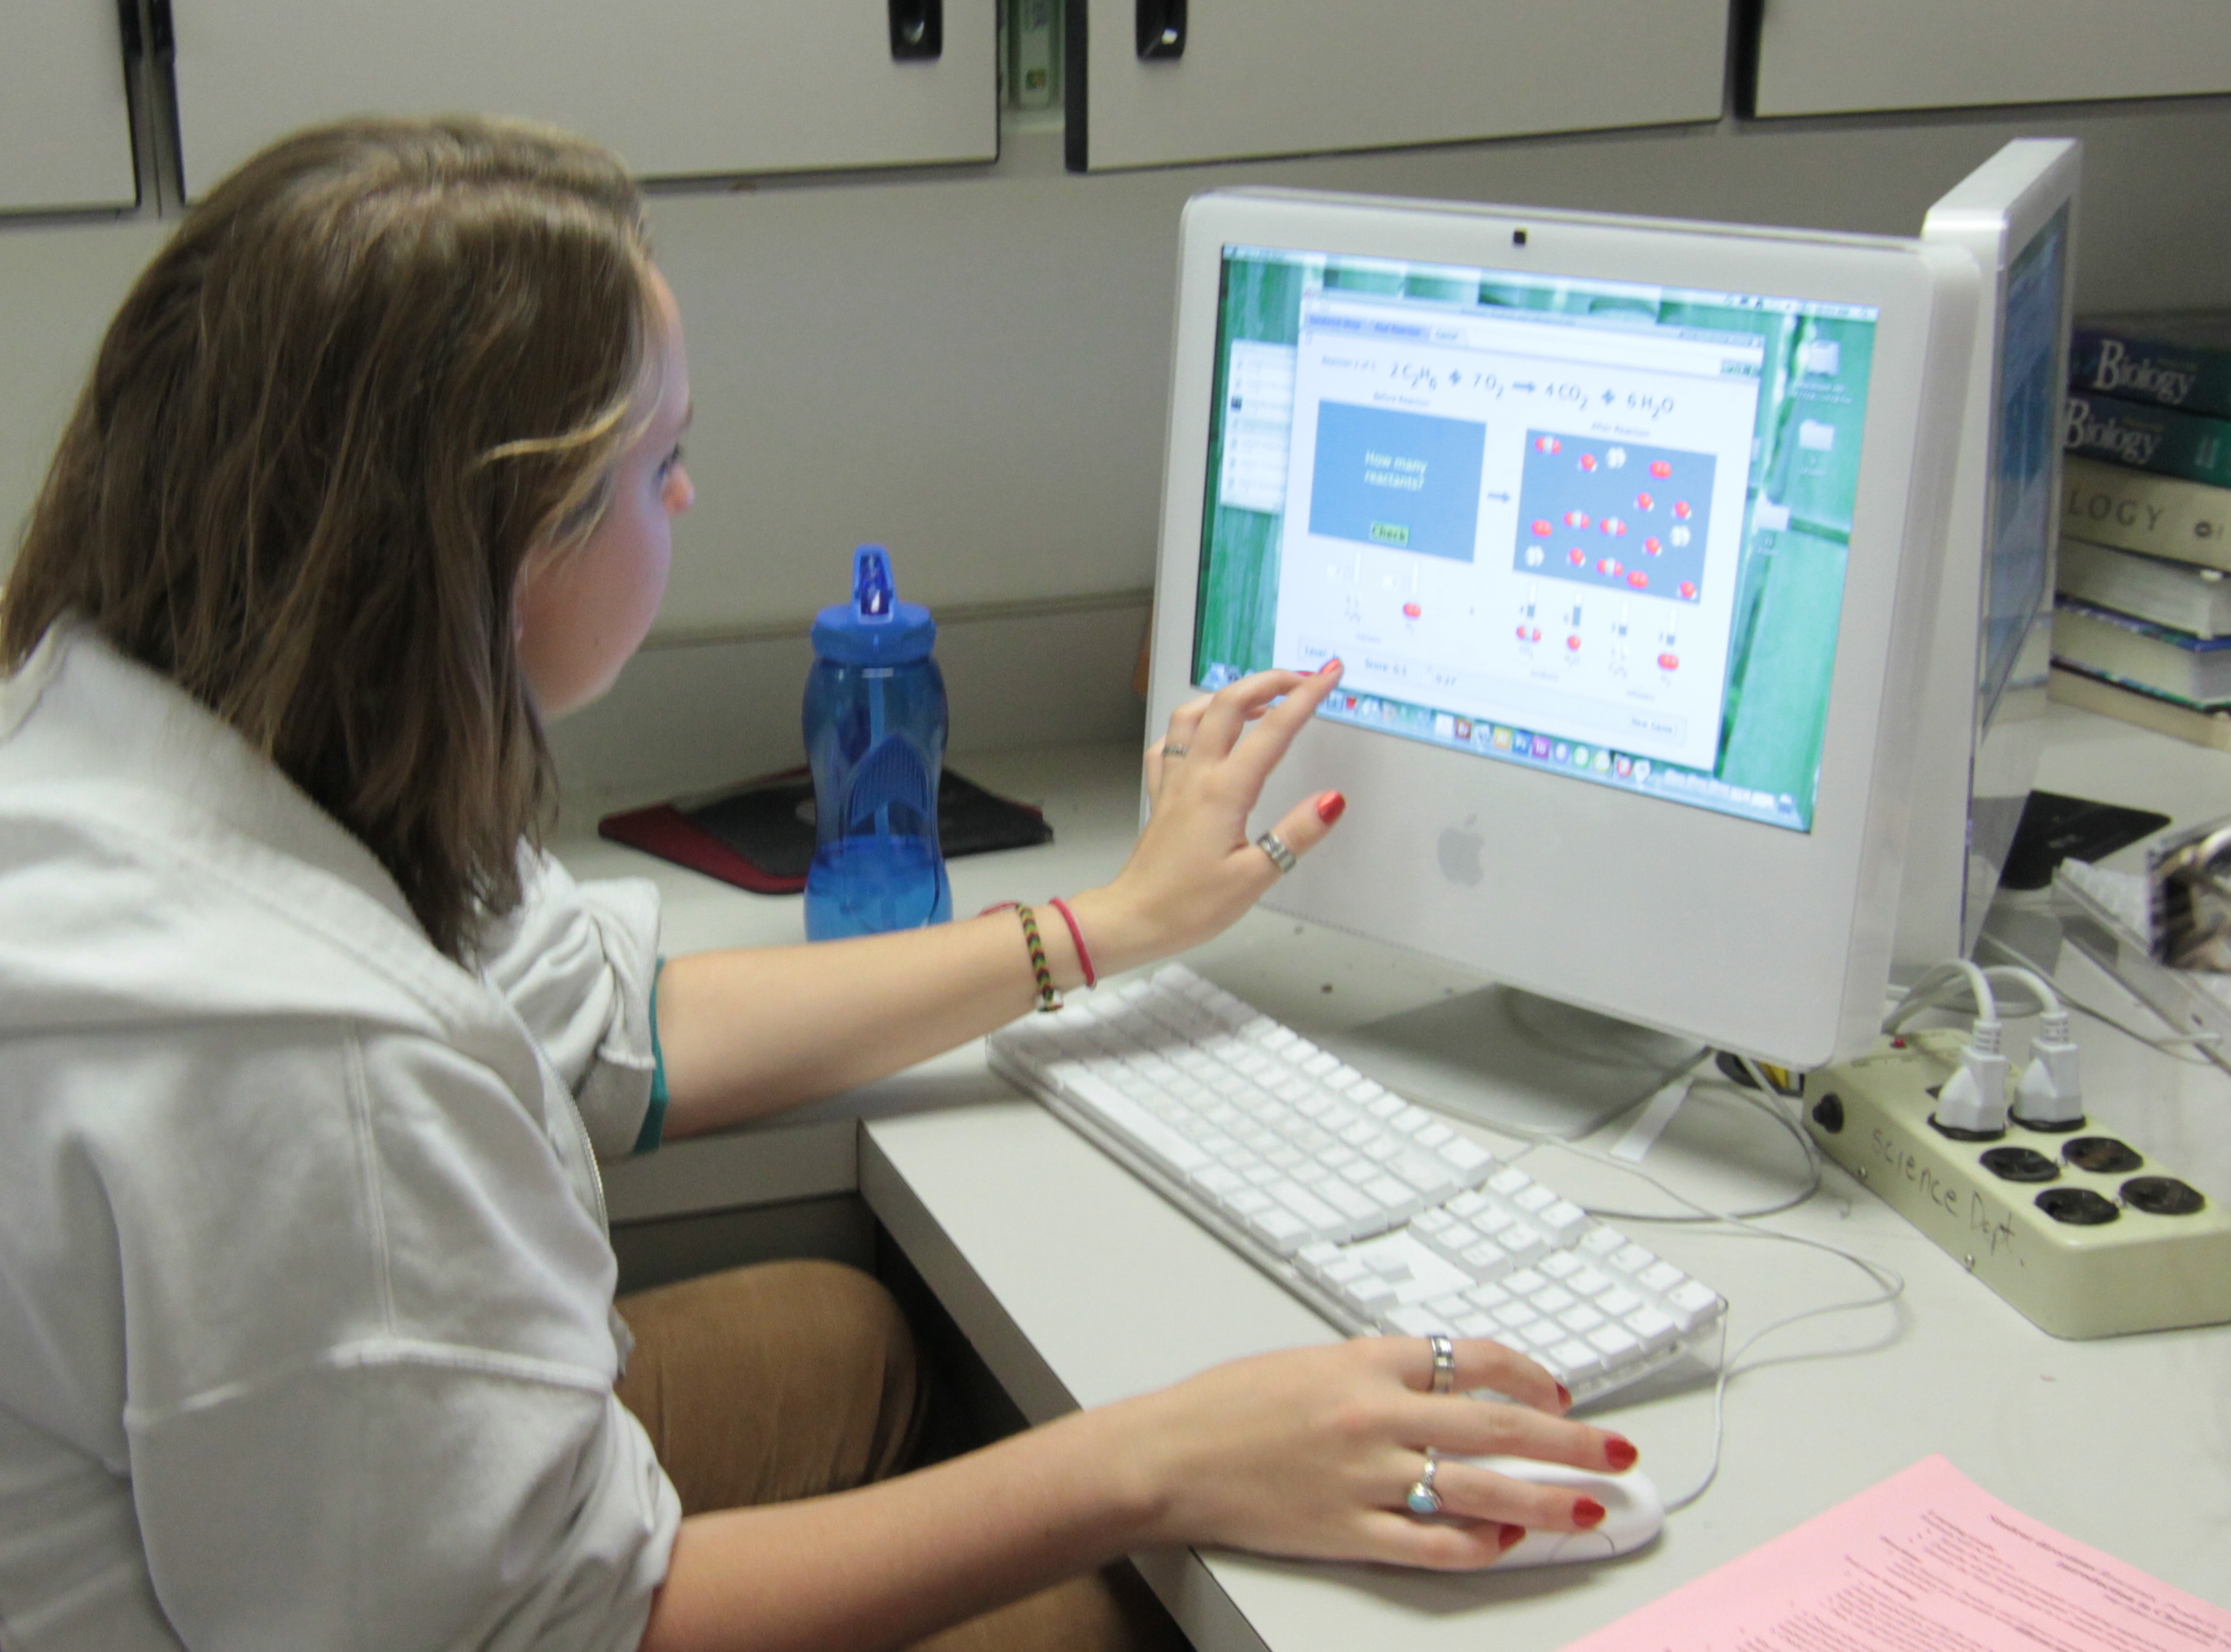 A student in a high school classroom exploring a simulation and discussing her observations with the others in her group.